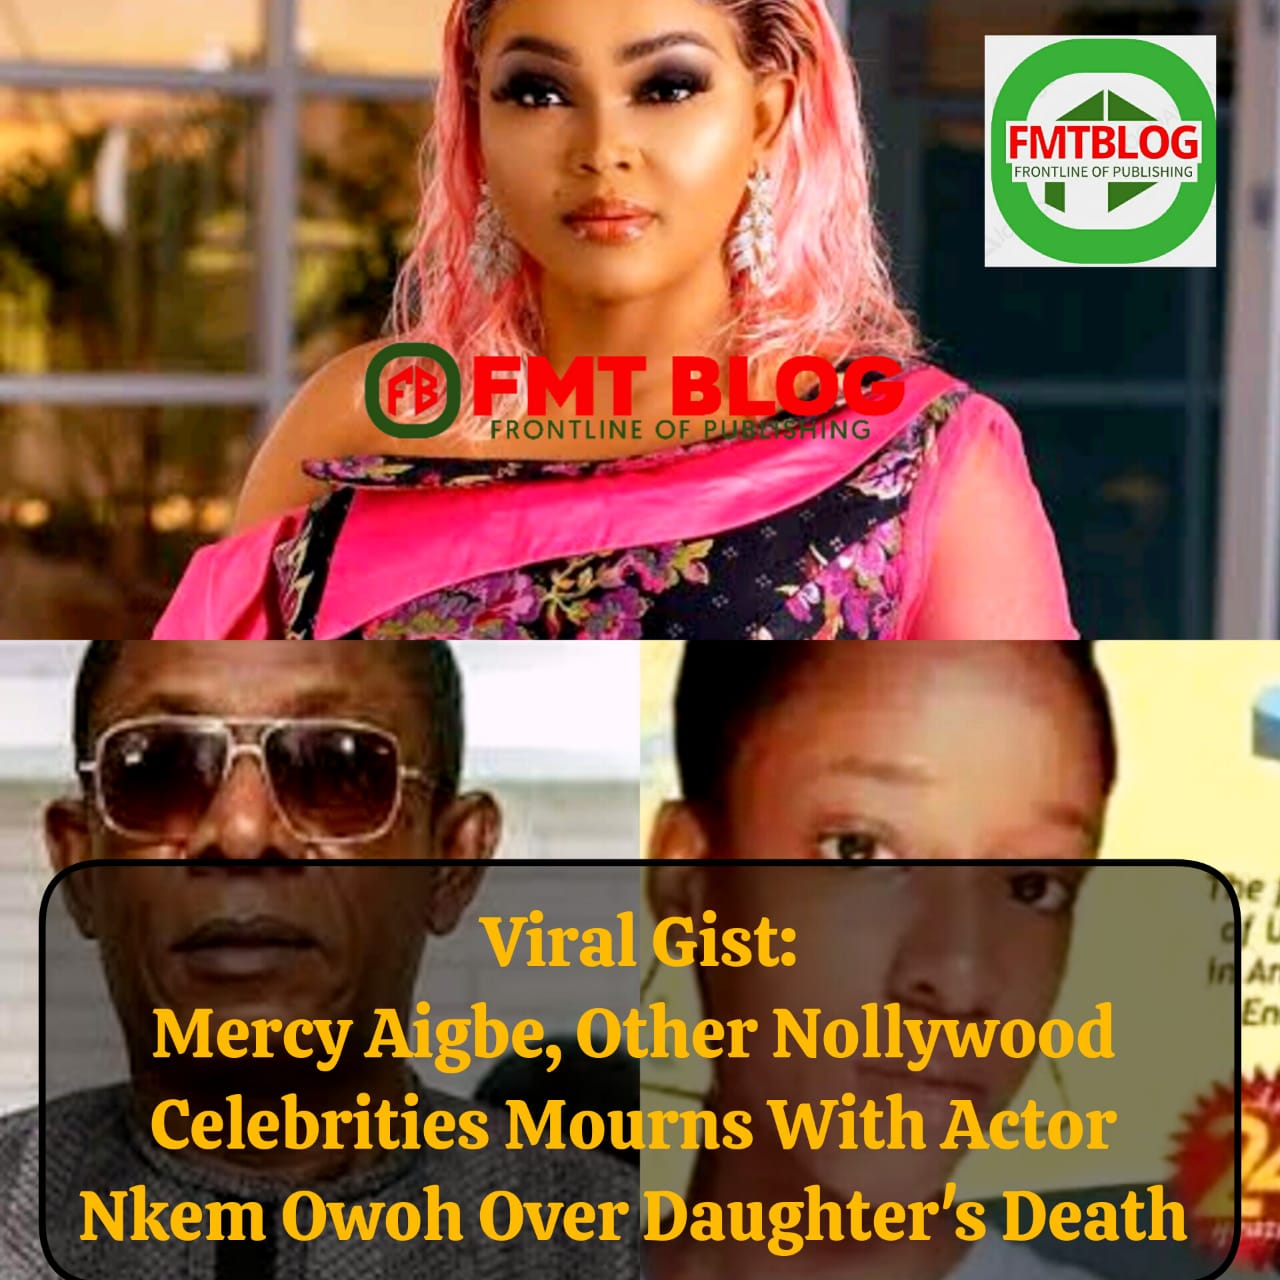 Mercy Aigbe, Other Nollywood Celebrities Mourns With Veteran Actor Nkem Owoh Over Daughter’s Death